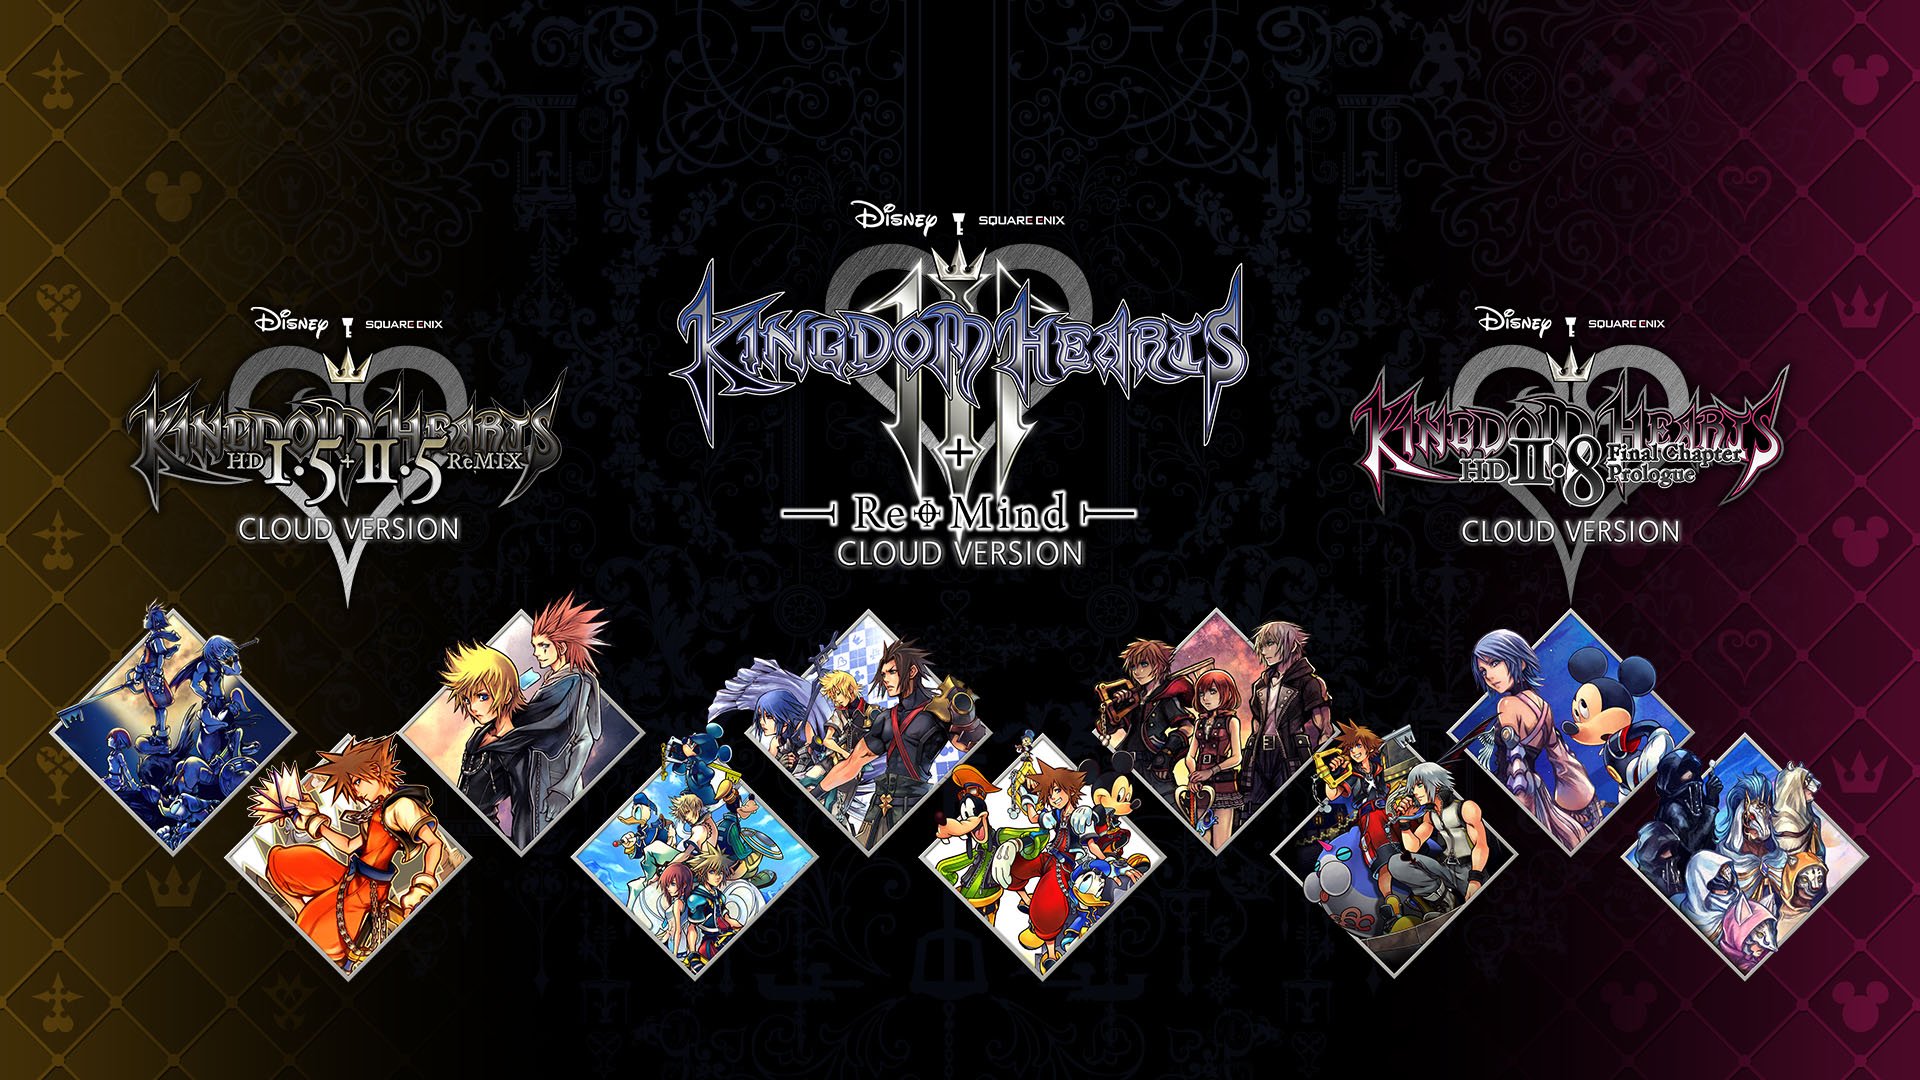 Kingdom Hearts series cloud versions for Switch launch February 10 - Gematsu